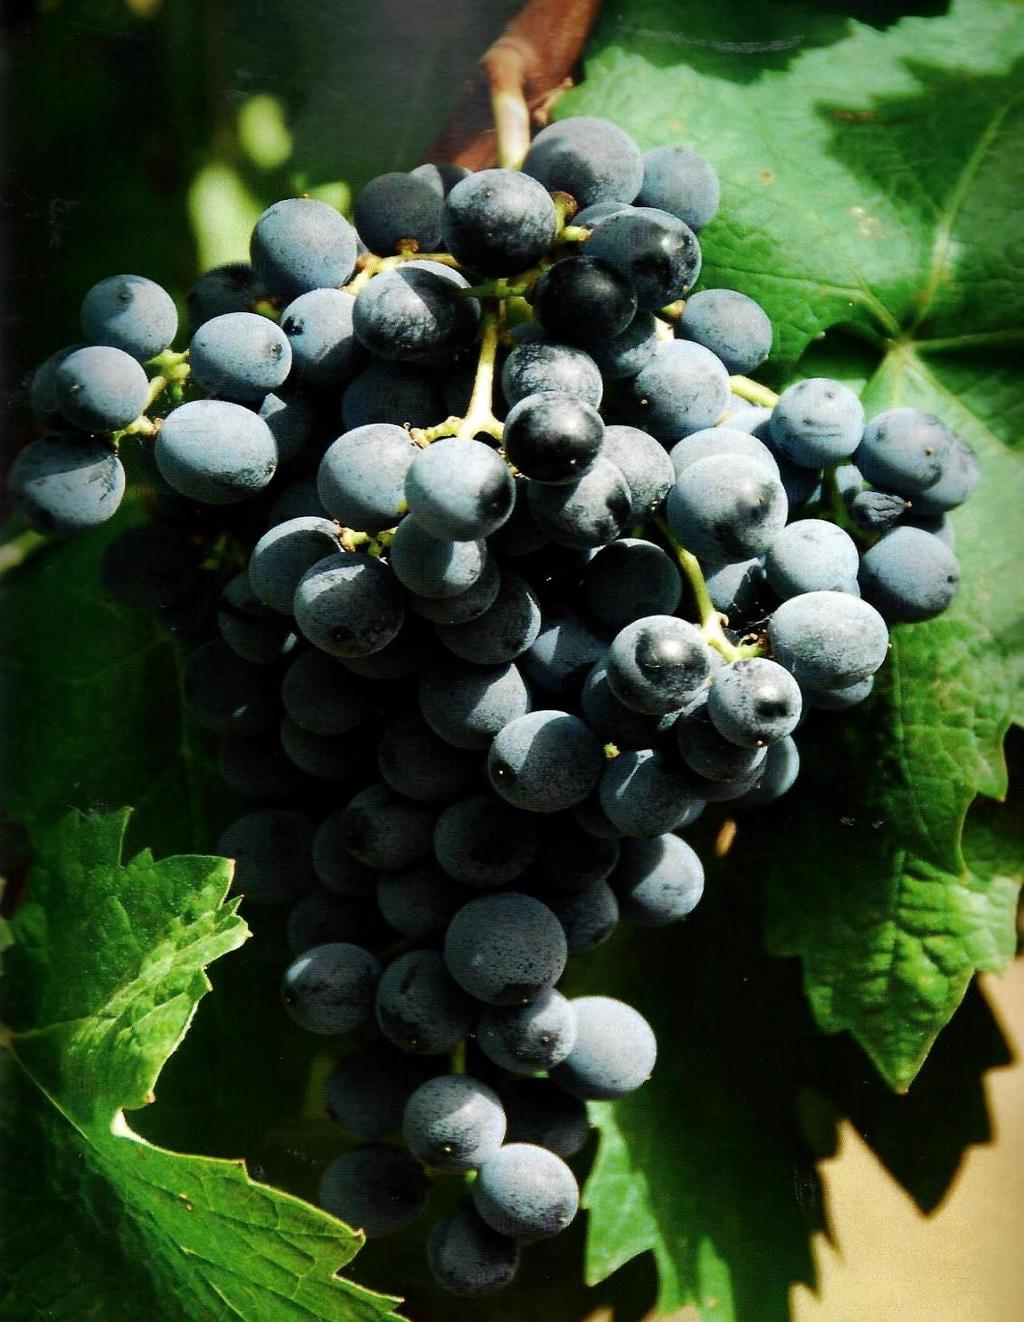 Graciano/Tinta Miuda Origin: Presumably Ancient Rome or Northern Spain (Rioja) Synonyms: Many regional denominations exist in Spain and Portugal Area cultivated: 1.